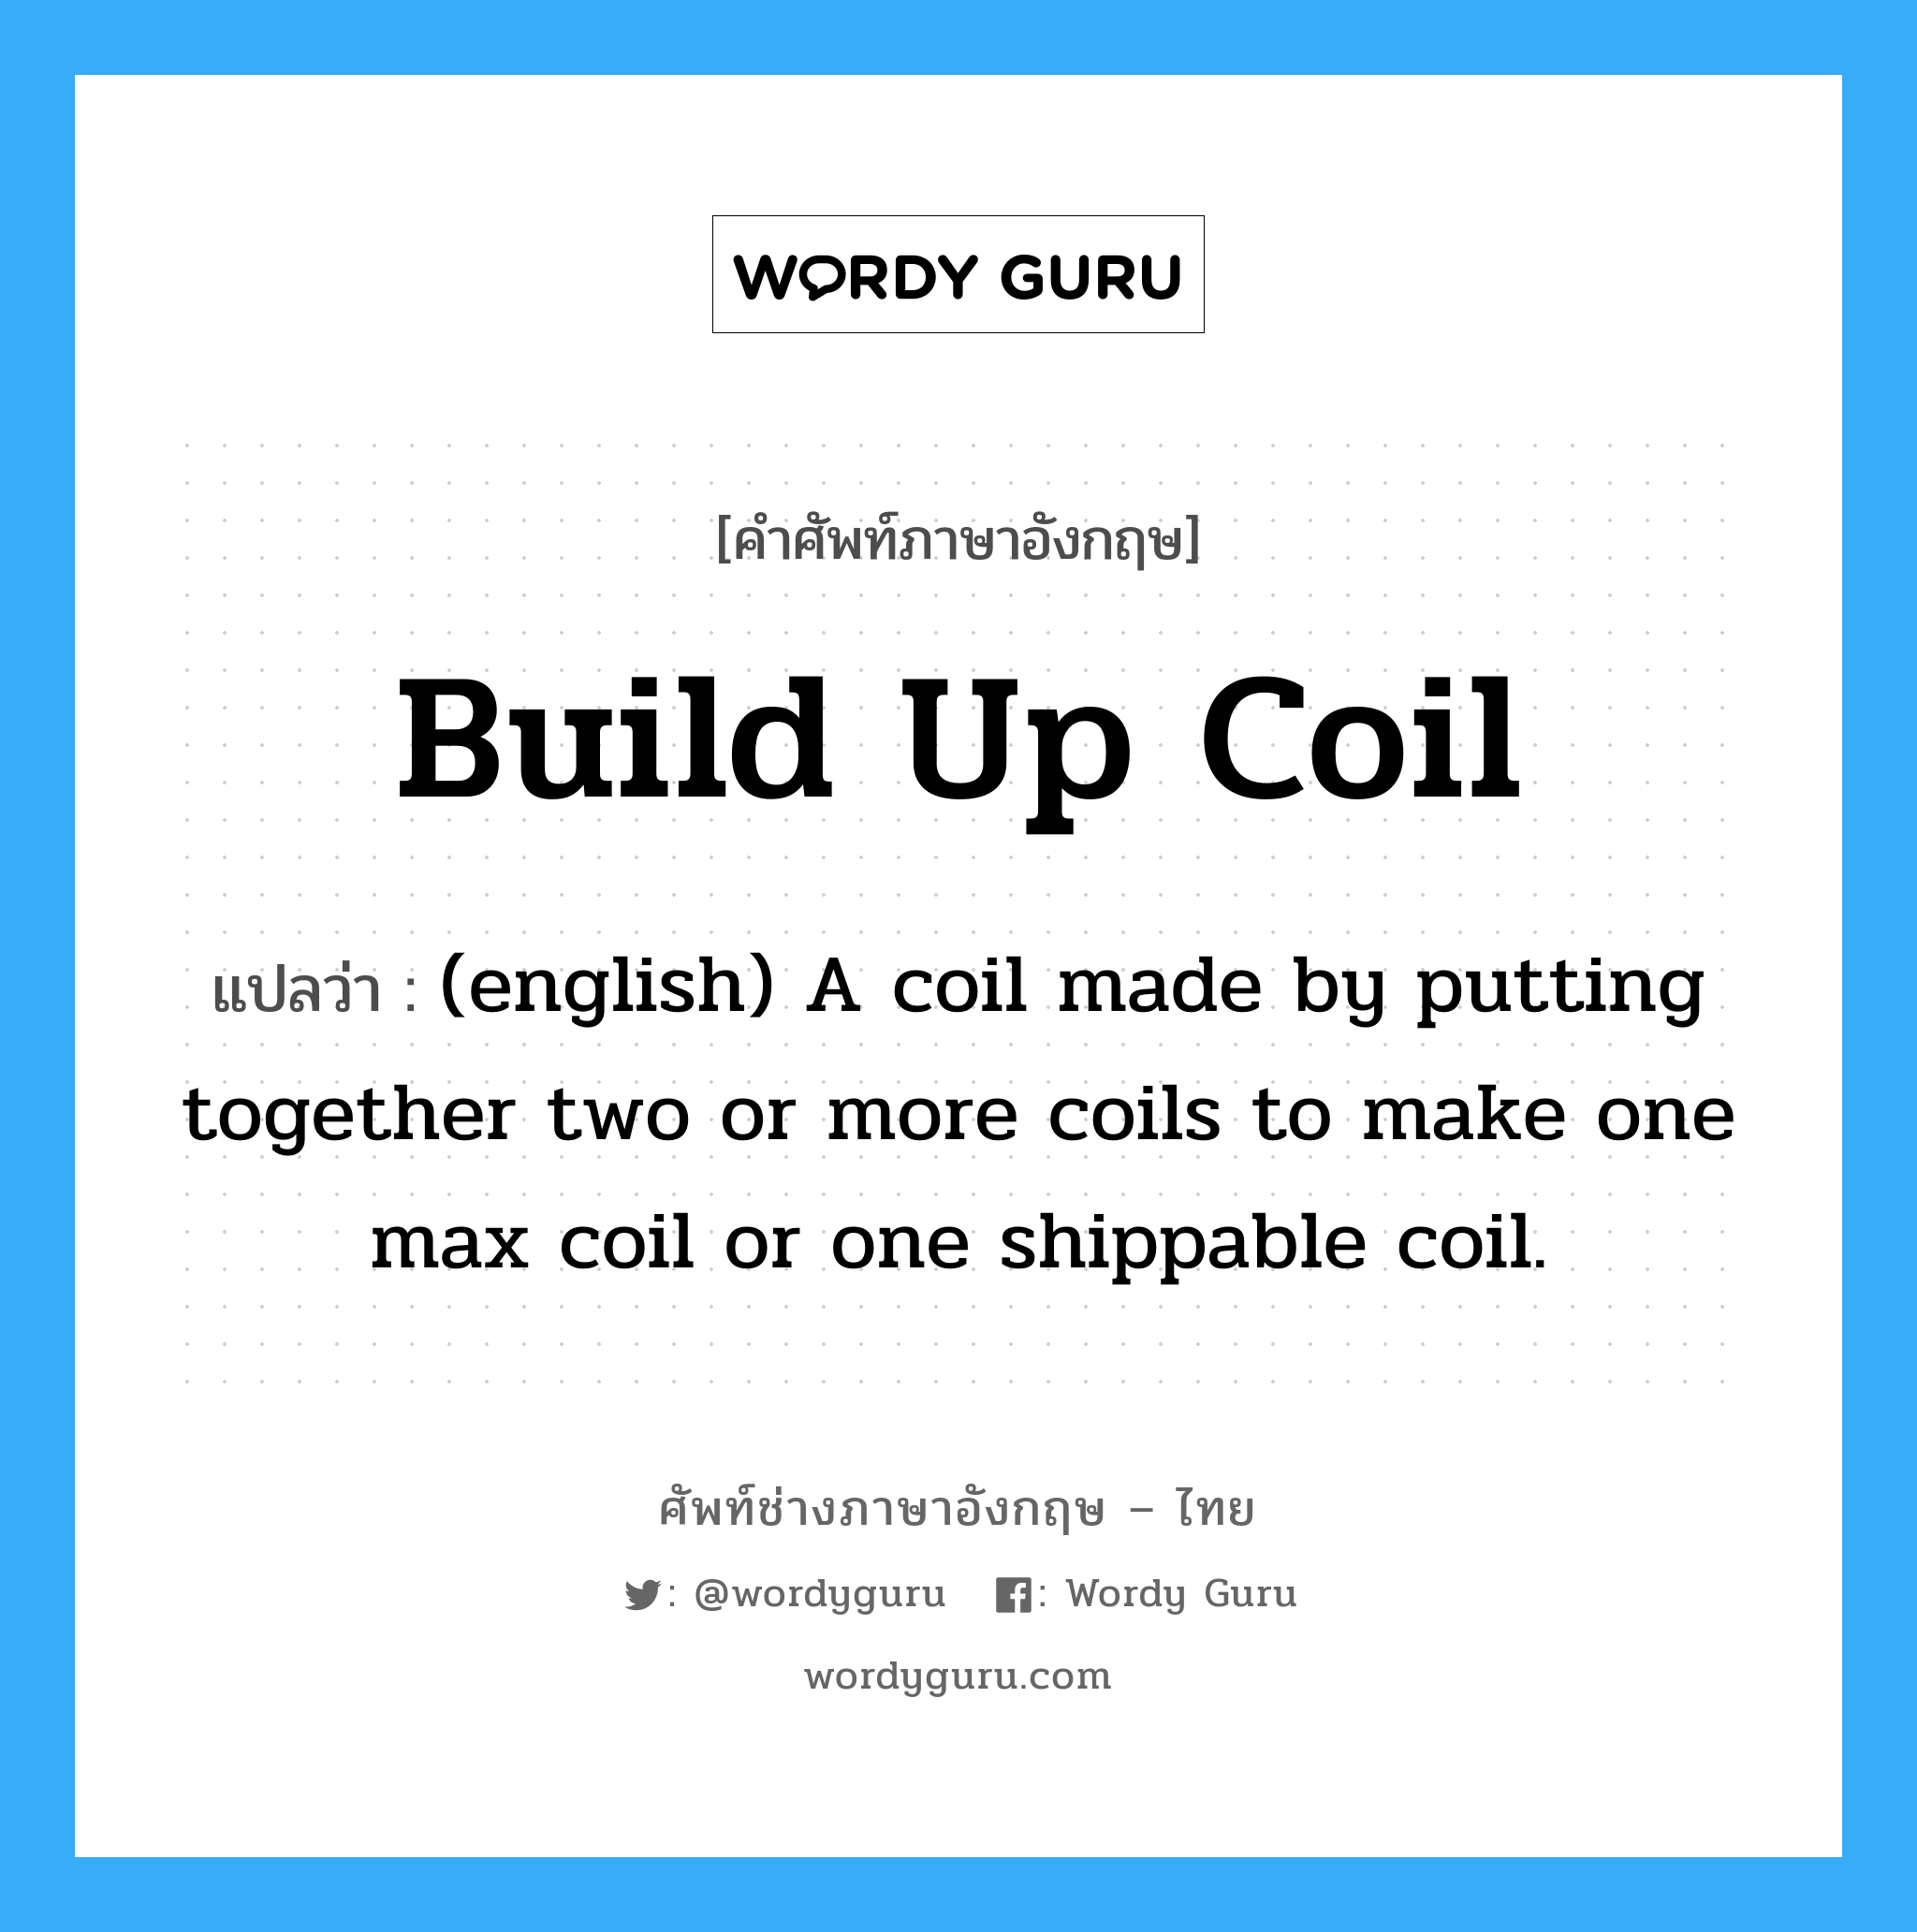 Build Up Coil แปลว่า?, คำศัพท์ช่างภาษาอังกฤษ - ไทย Build Up Coil คำศัพท์ภาษาอังกฤษ Build Up Coil แปลว่า (english) A coil made by putting together two or more coils to make one max coil or one shippable coil.